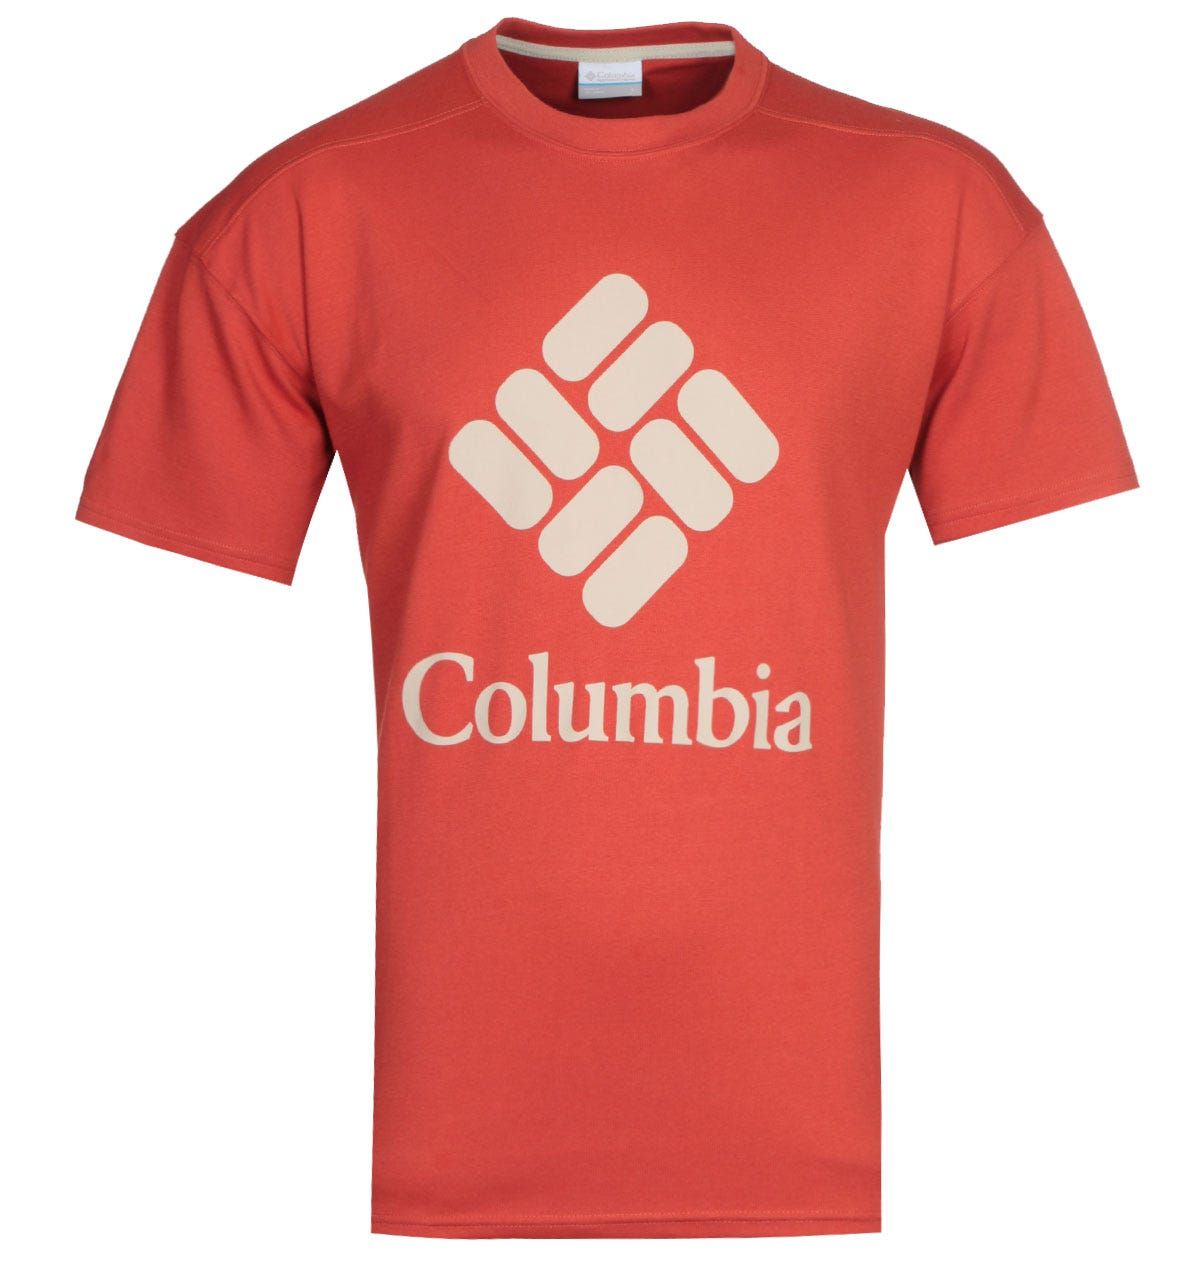 <p>A cool-season essential crafted by <b>Columbia</b>. The Columbia Lodge red T-Shirt is a classic silhouette fitted with a crew neck and tonal stitching to give a vibrant touch. The design is finished with the Columbia logo printed on the chest and sleeve. </p><ul><li>Cotton composition</li><li>Crew neck</li><li>Short Sleeve</li><li>Ribbed Trims </li><li>Tonal Stitching </li><li>Branded Logo Printed on Chest and Sleeve</li></ul><p>Style and Fit:</p><ul><li>Regular Fit </li><li>Fits true to size</li></ul><p>Fabric Composition & Care:</p><ul><li>73% Cotton </li><li>27% Polyester </li><li>Machine Wash </li></ul>